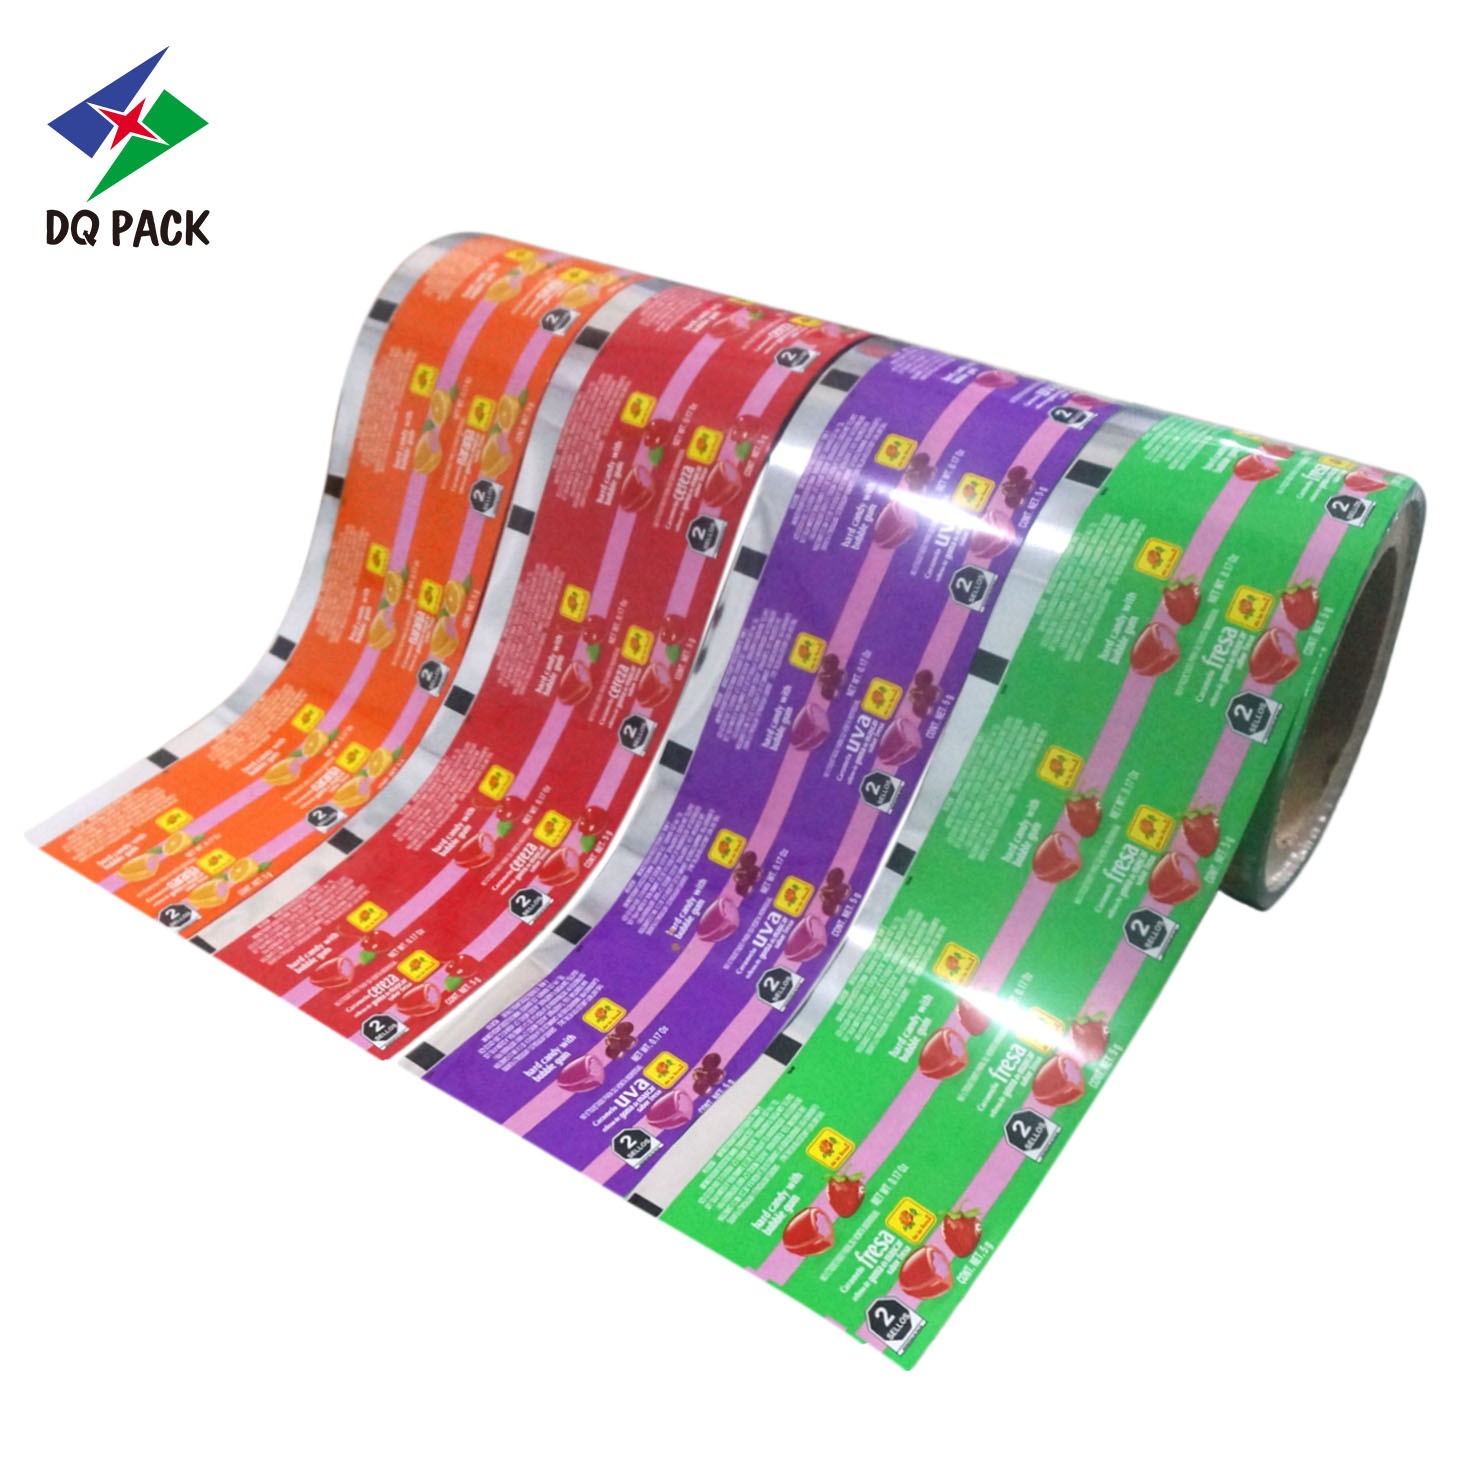 DQ PACK Customized Printing Laminated Material Candy Packaging Metalized Film Roll Film